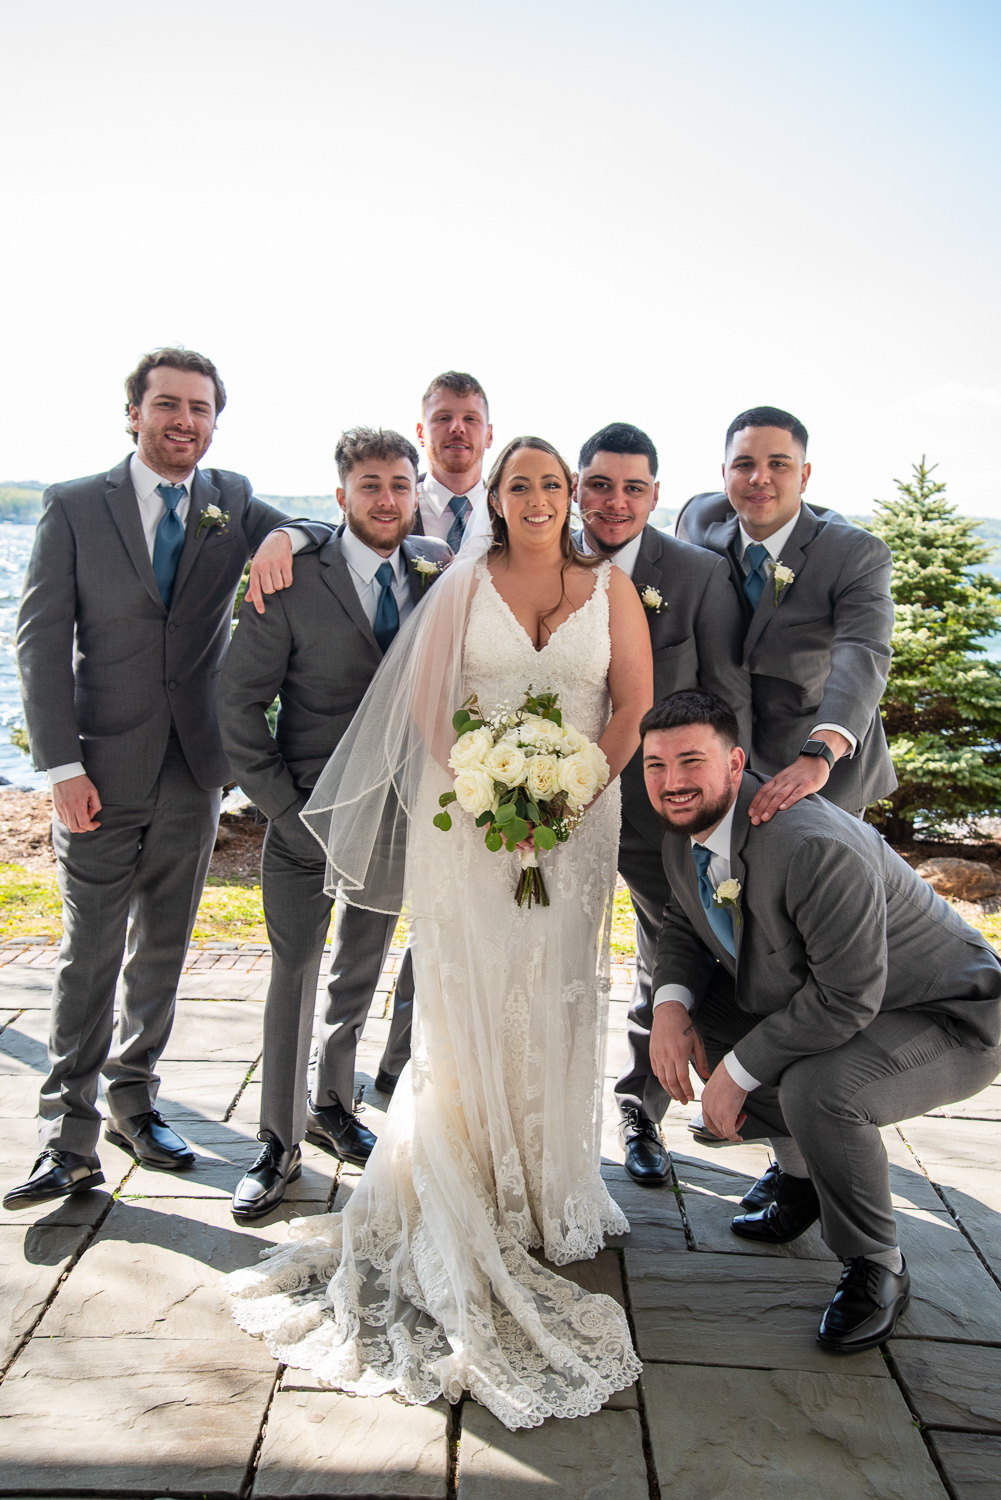 Bride with the groomsman at the lakeside wedding